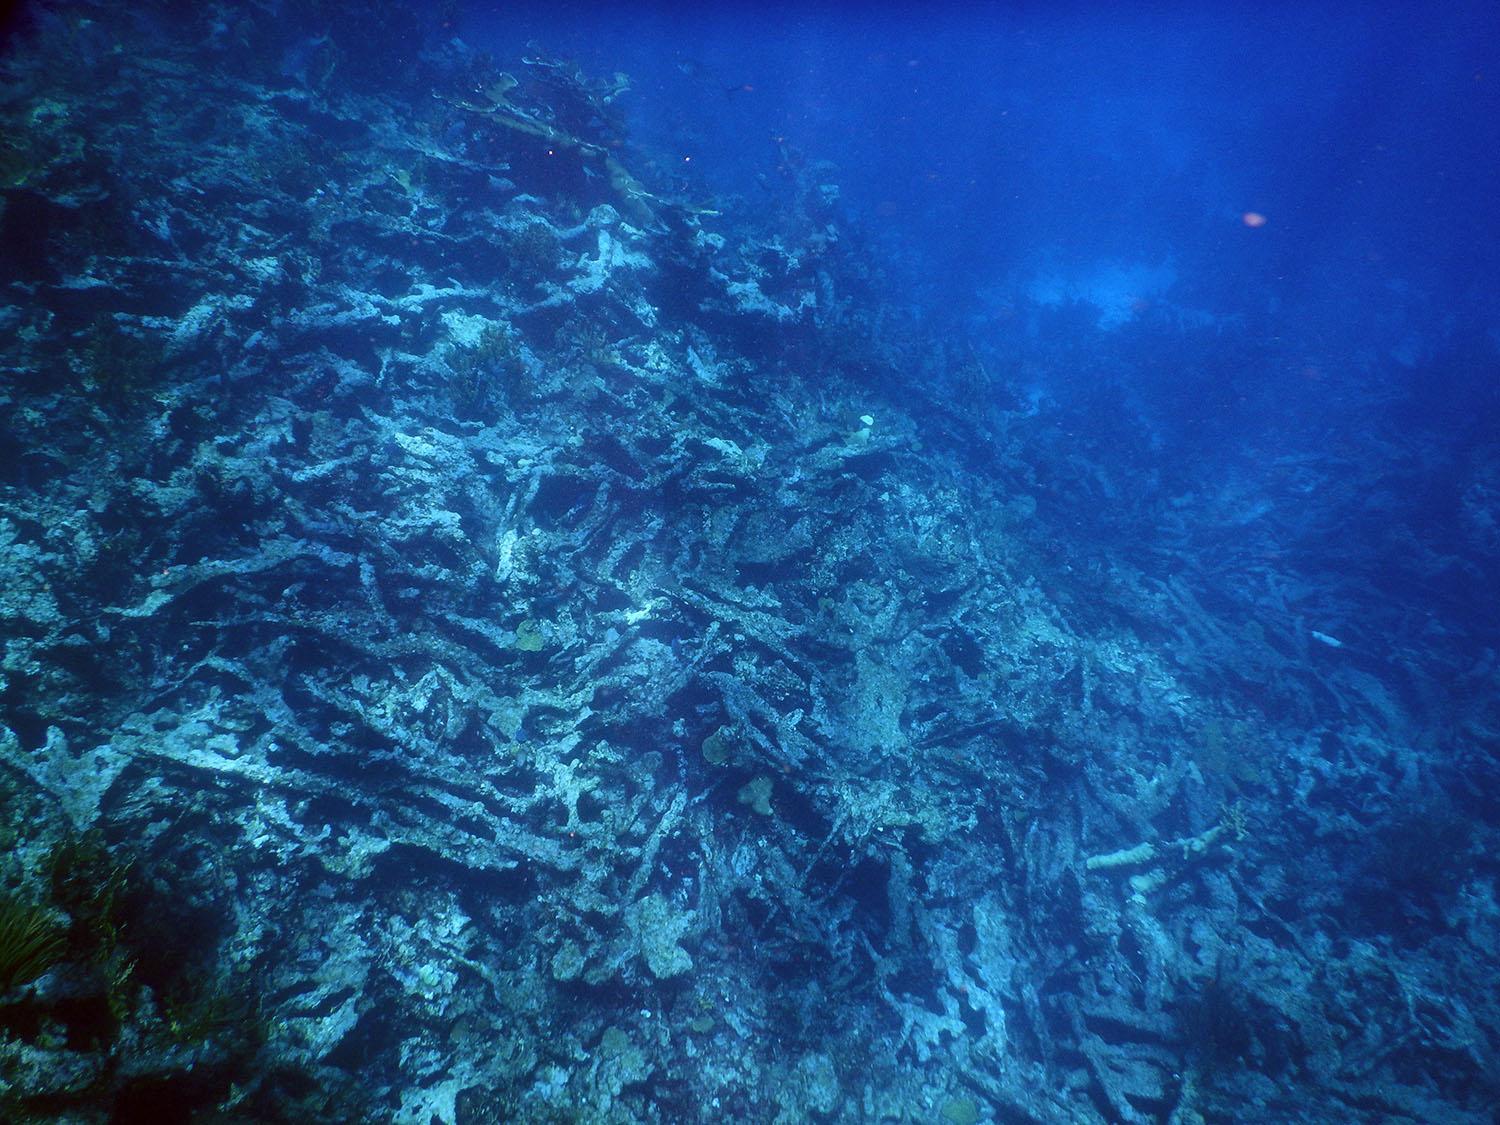 Dead Elkhorn coral near Buck Island in the US Virgin Islands. As coral reef structure degrades, valuable habitat for marine life is lost and nearby coastlines become more susceptible to storms, waves and erosion